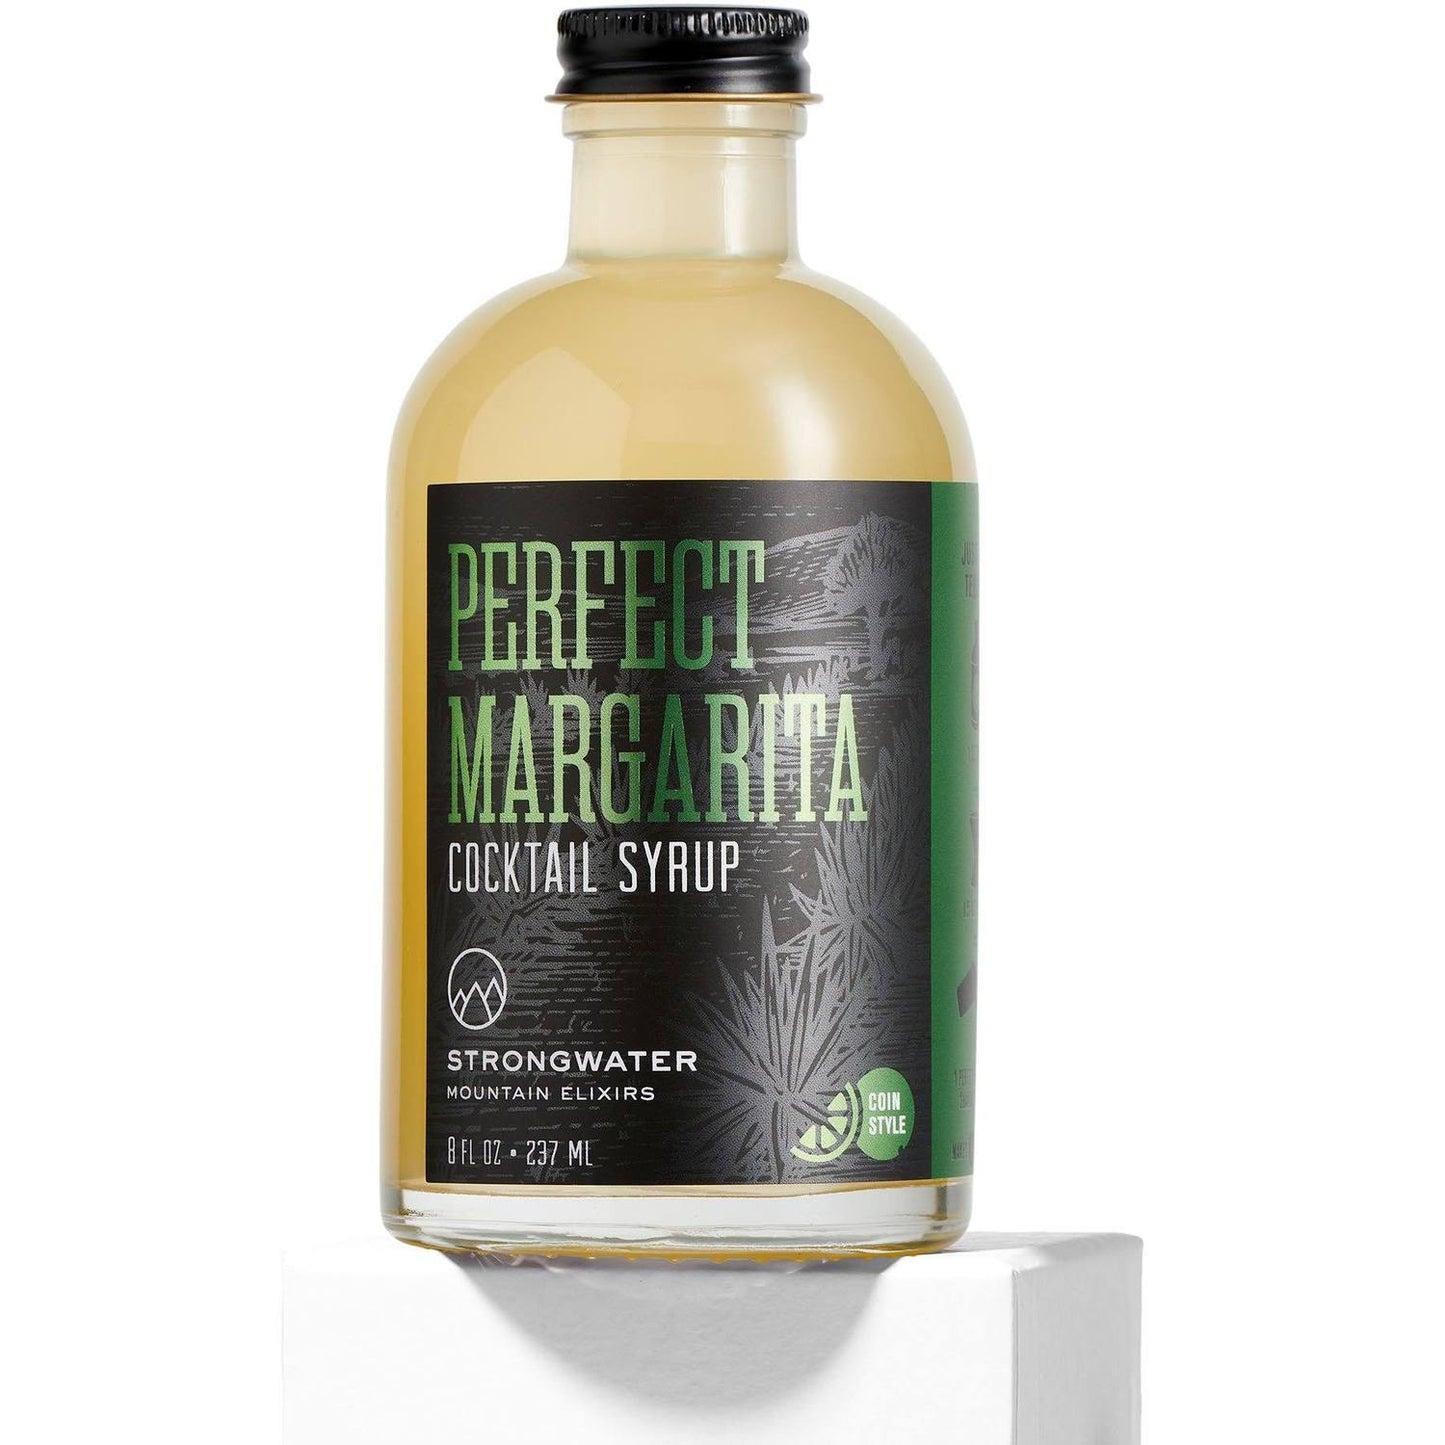 Coin-style Margarita Cocktail syrup mix in glass bottle